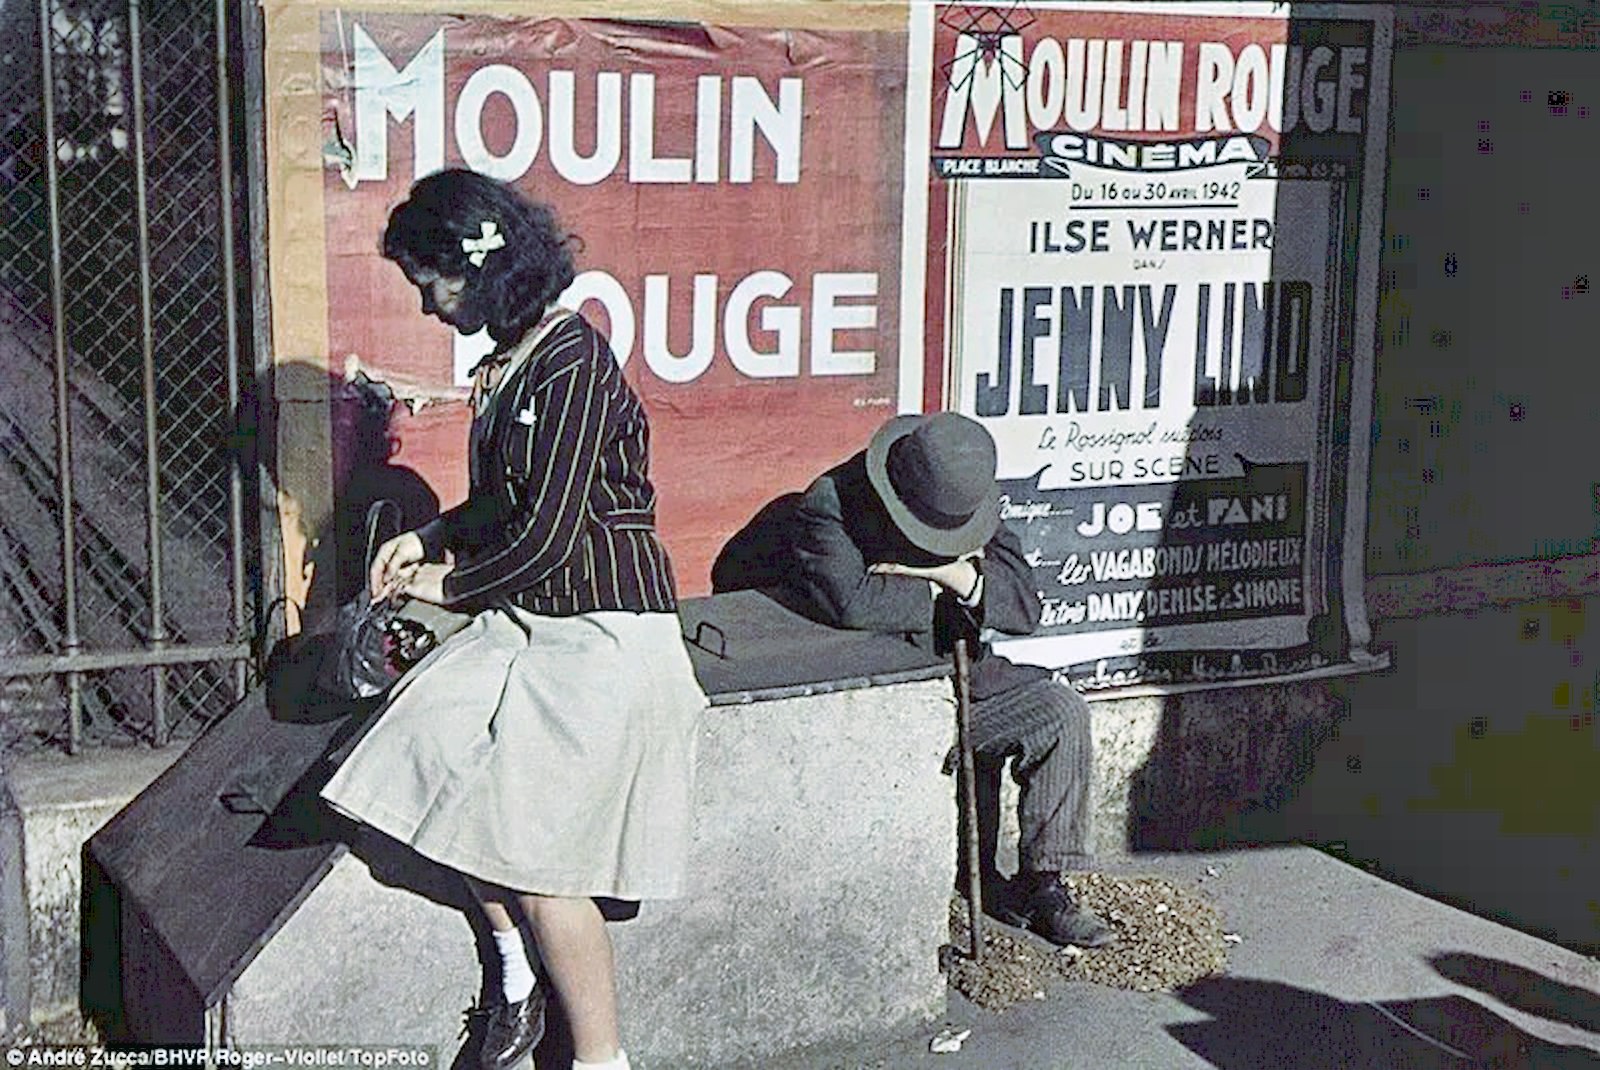 A young woman checks her handbag while a man sits slumped over a walking stick in front of posters for the City’s famous Moulin Rouge cabaret.